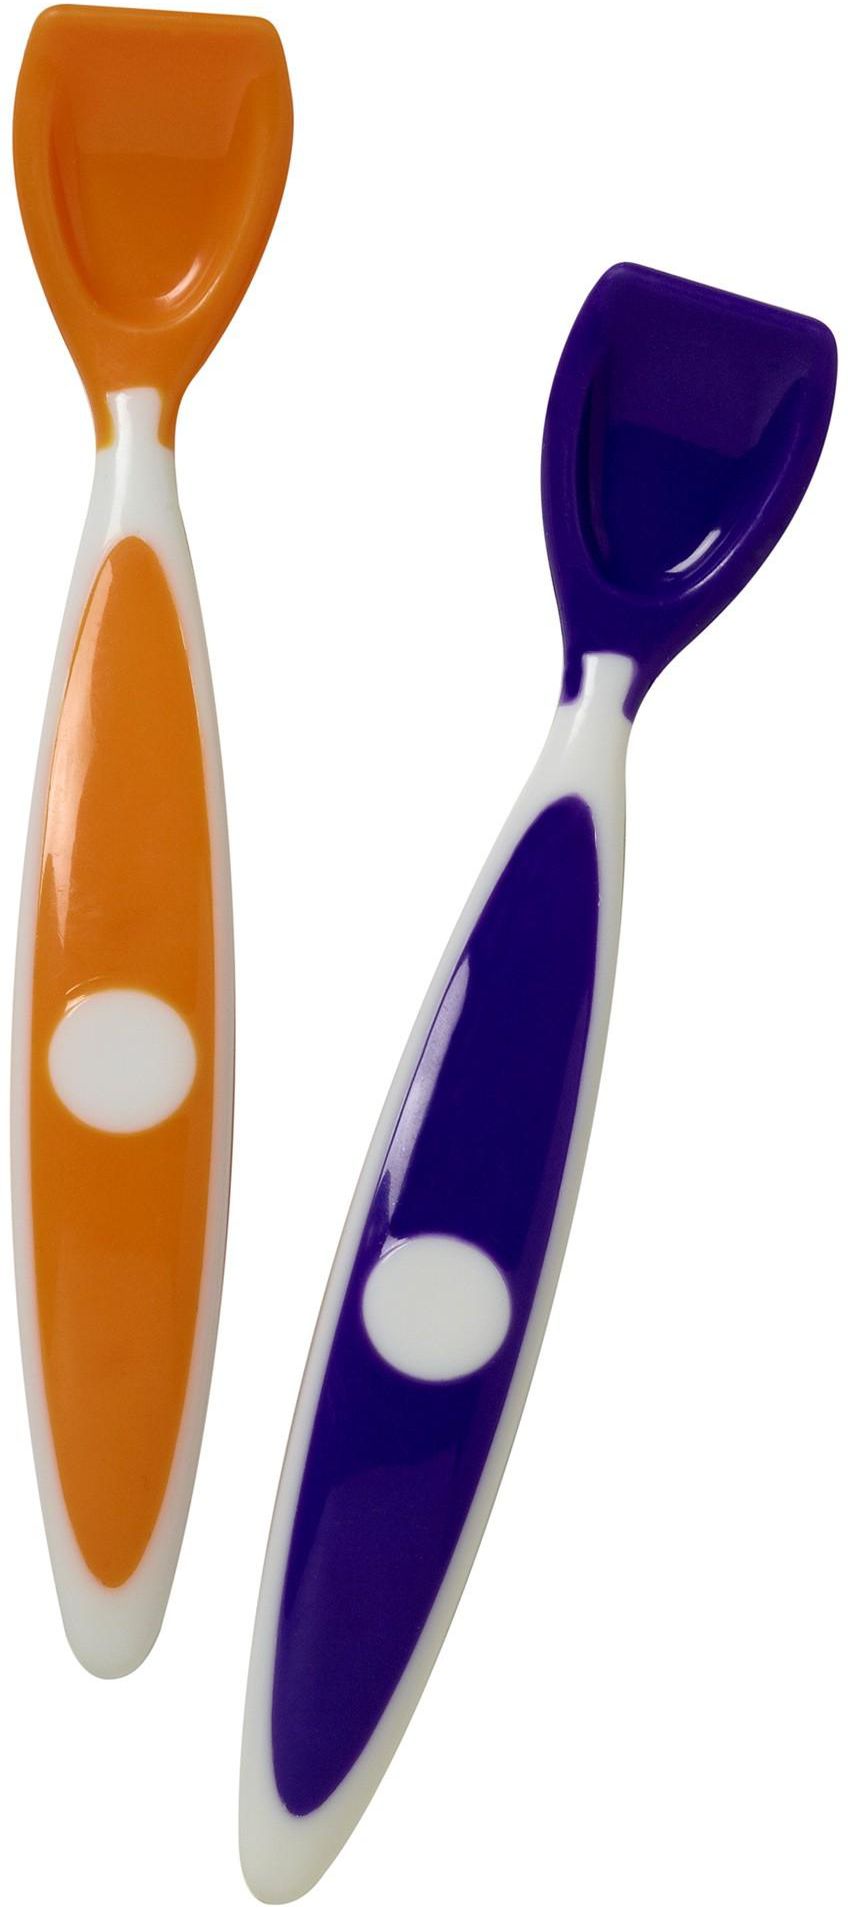 Dr. Brown's 2 Soft Spatula Spoons